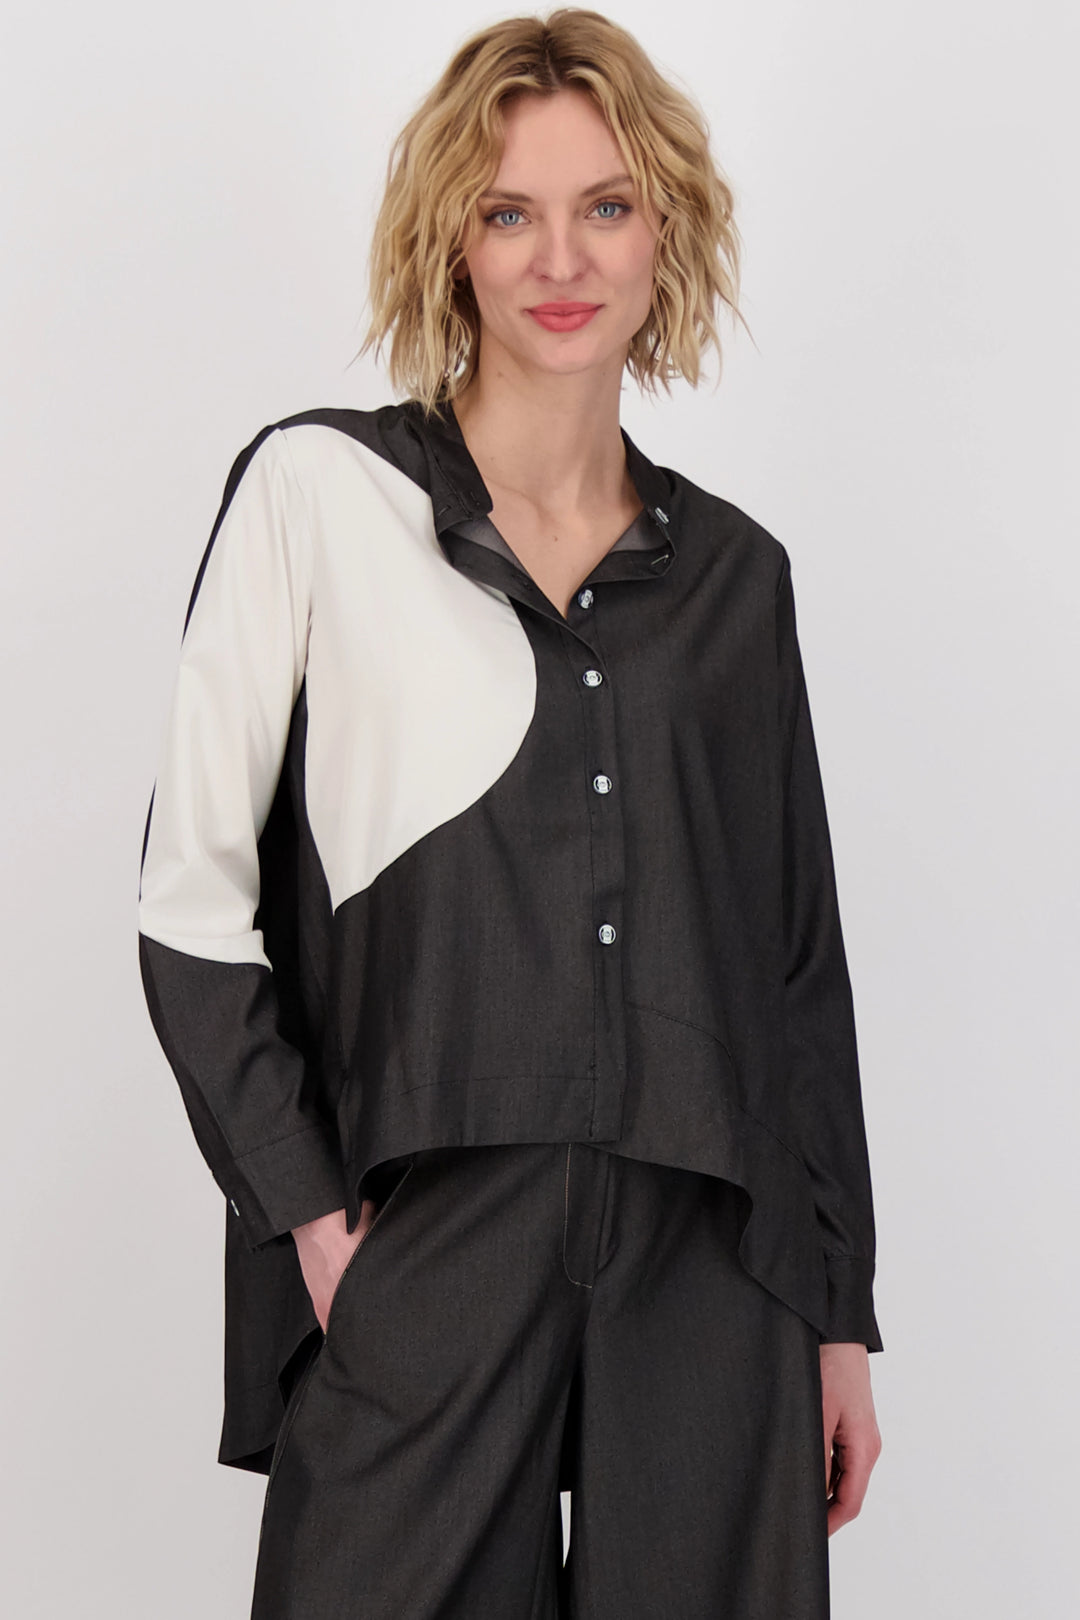 Crafted with silky smooth fabrics and featuring full length sleeves, this blouse is designed with a unique abstract pattern and finished with front buttons.